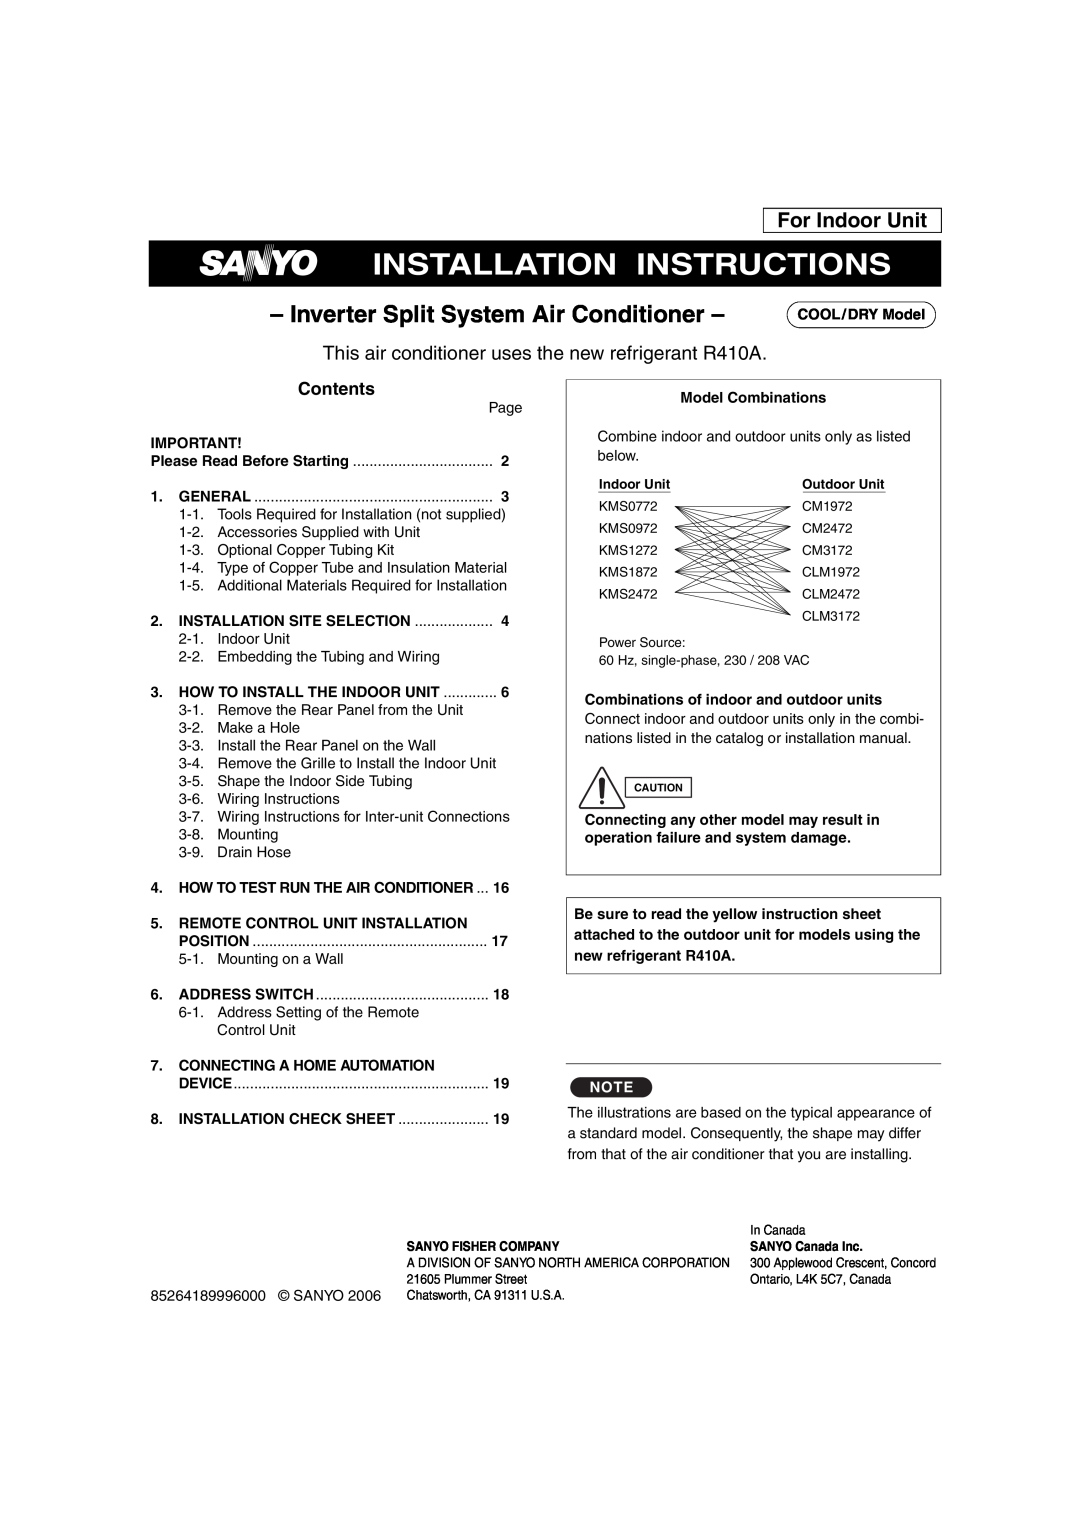 Sanyo KMS2472, KMS1872 For Indoor Unit, Contents, Installation Instructions, Inverter Split System Air Conditioner 